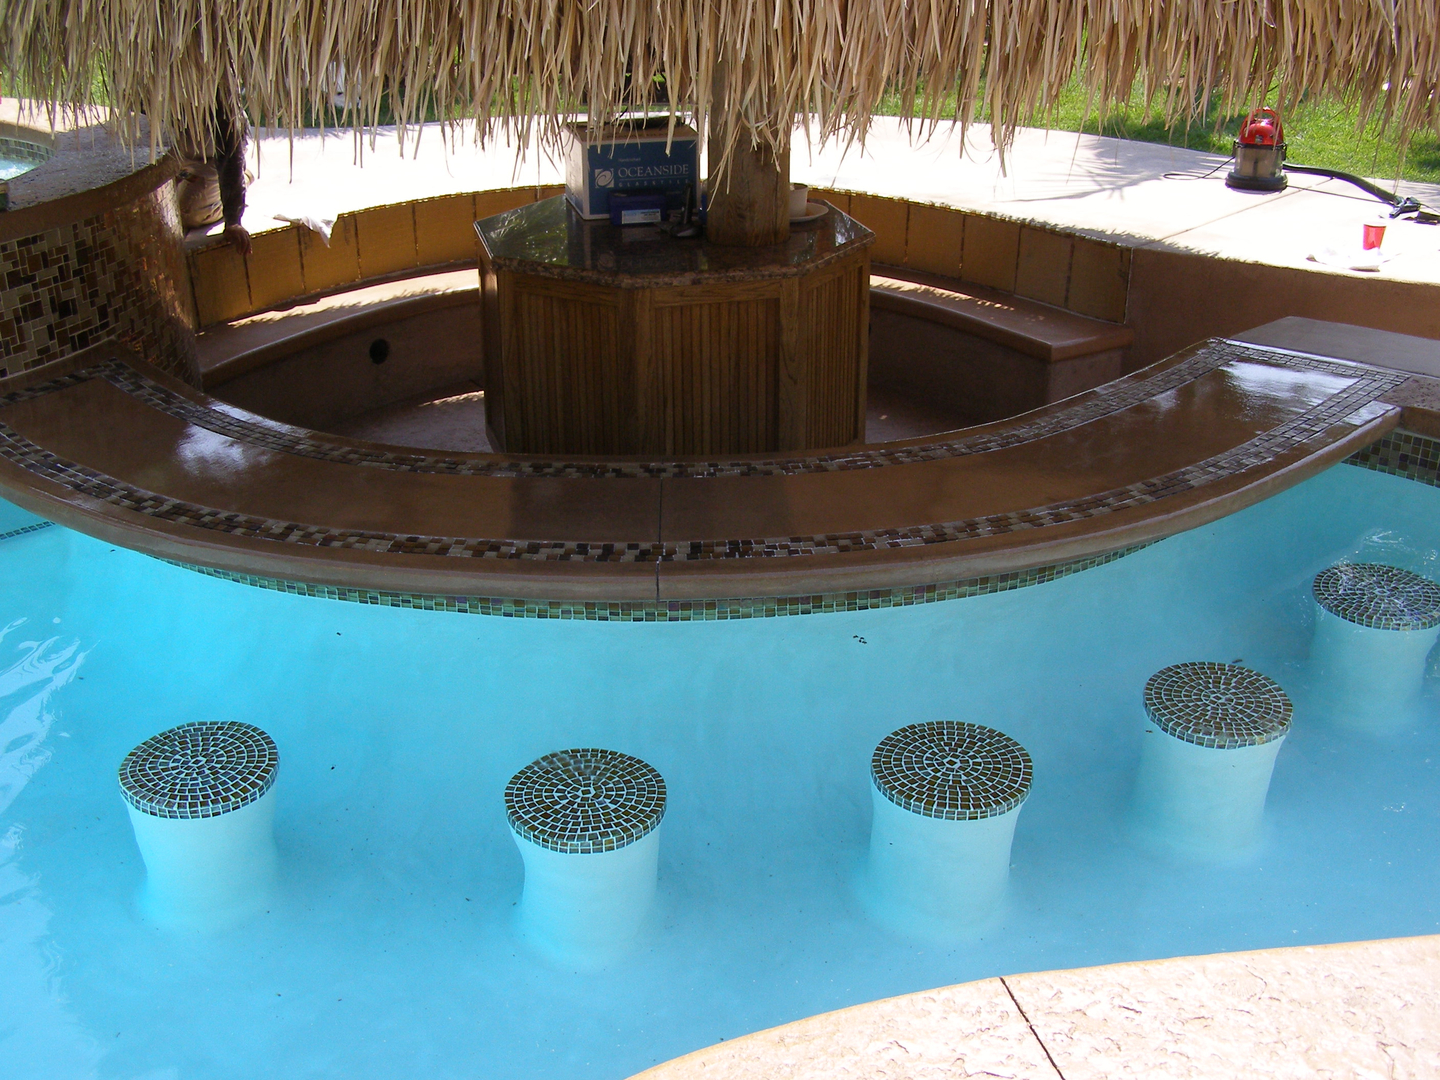 A Circular Shaped Counter Space Beside a Pool